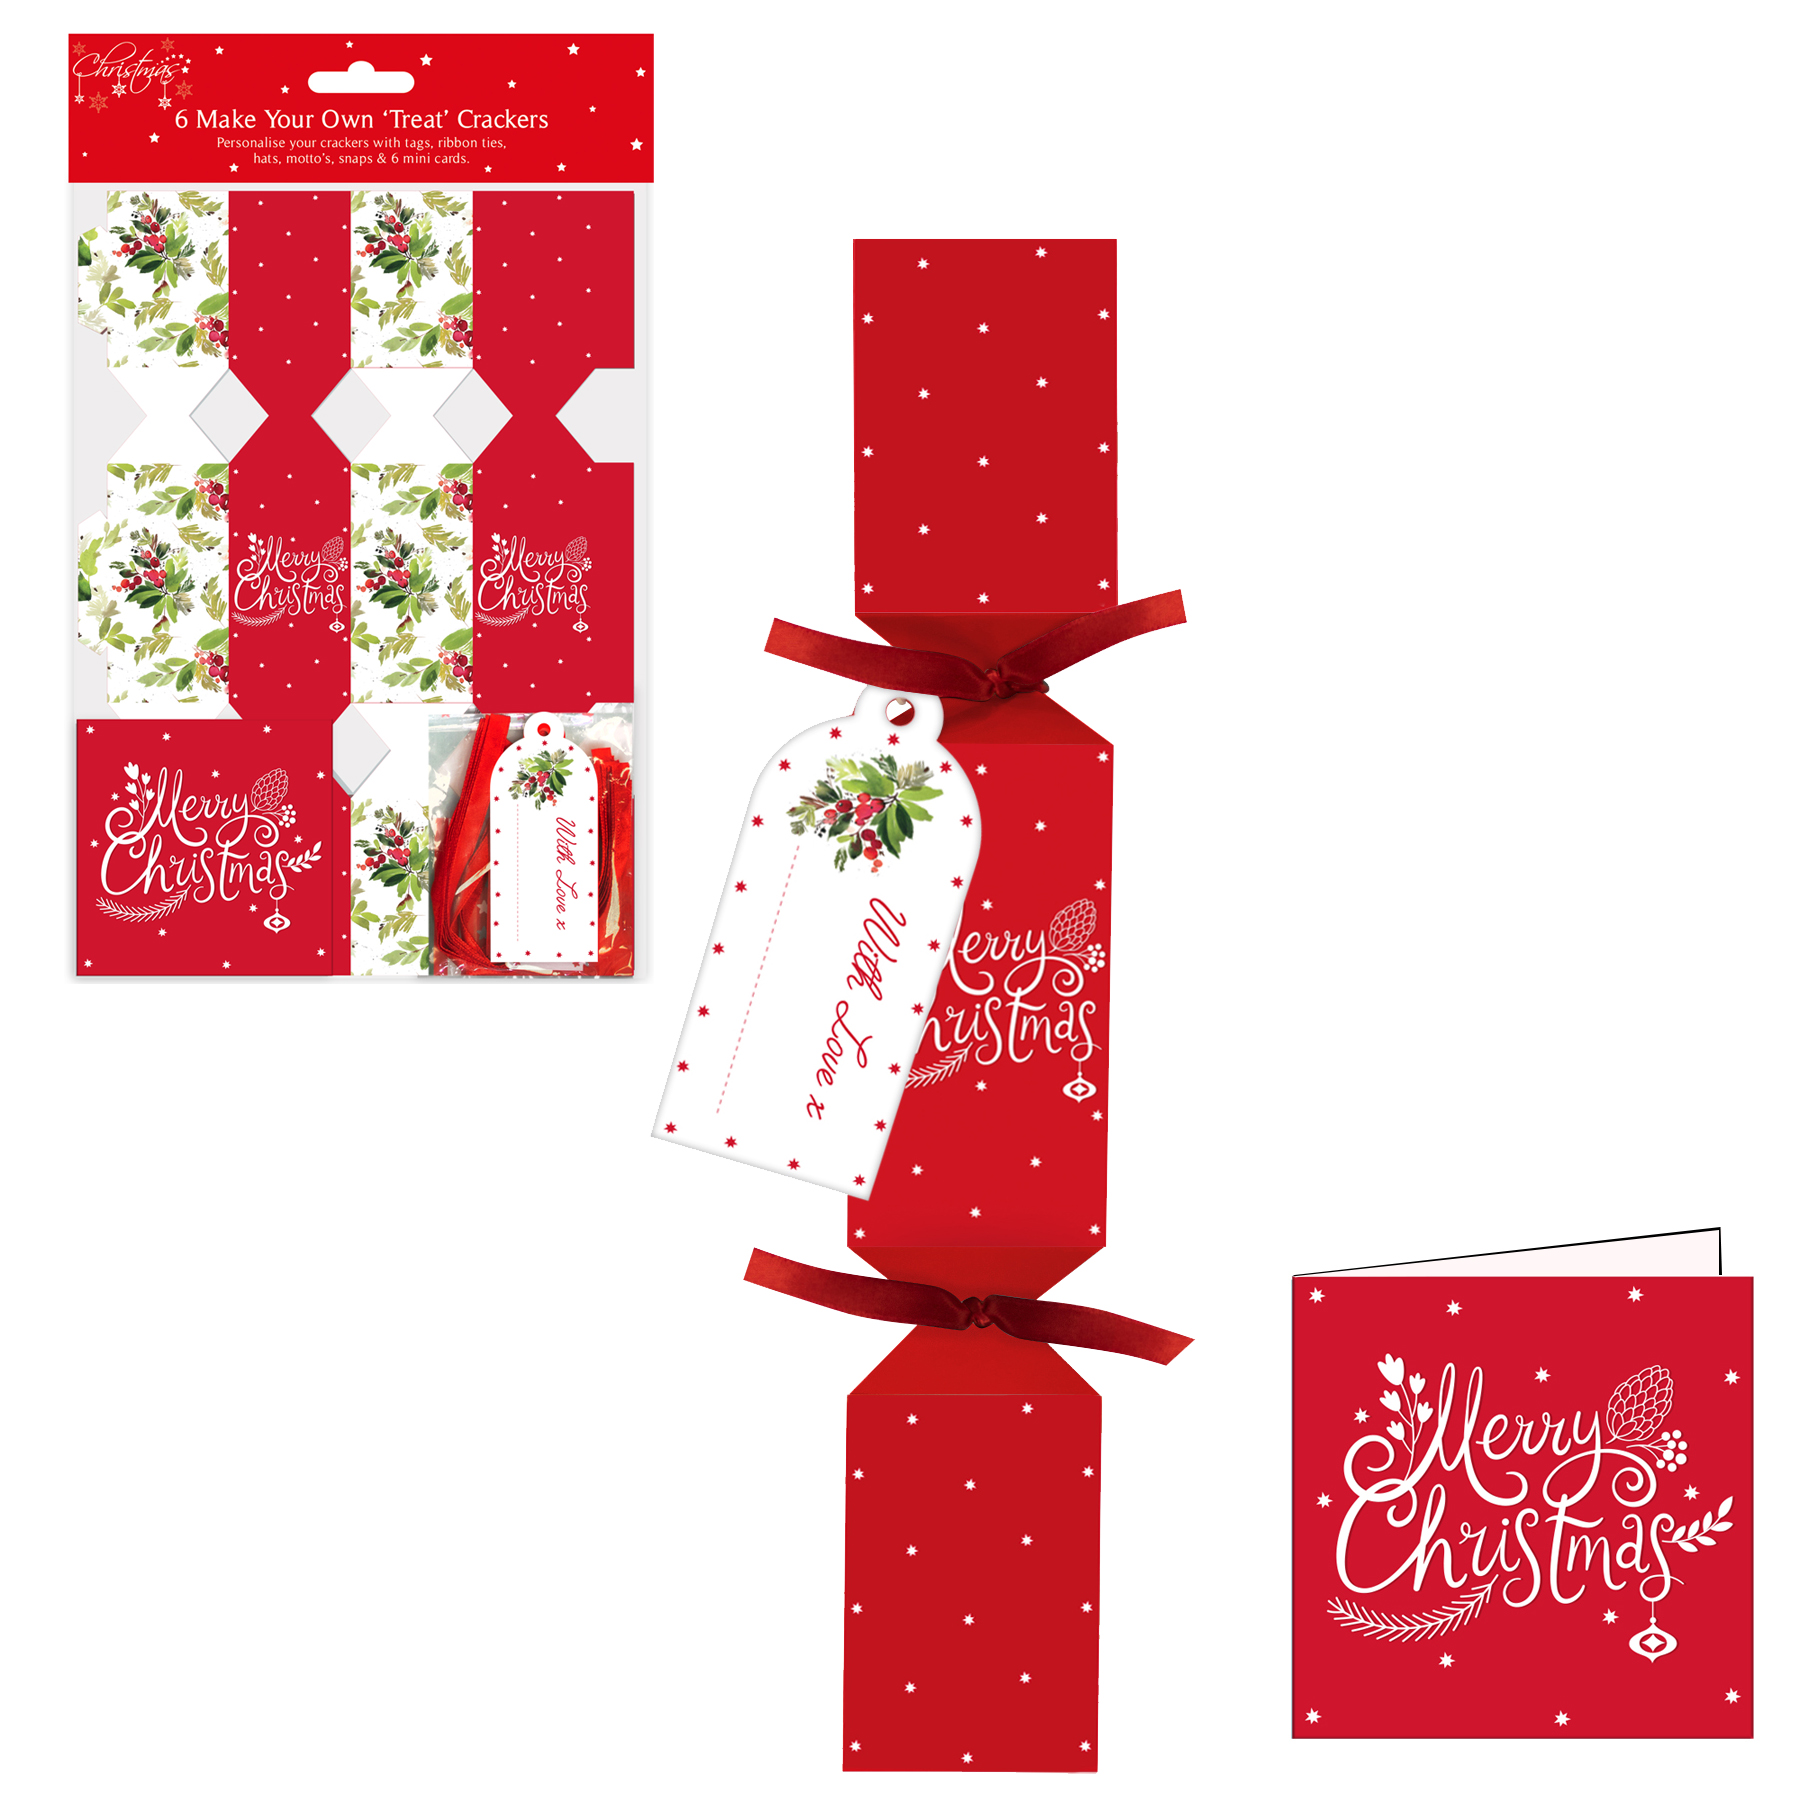 6 Pack Make your Own Treat Christmas Cracker Kit and Cards - Holly Design